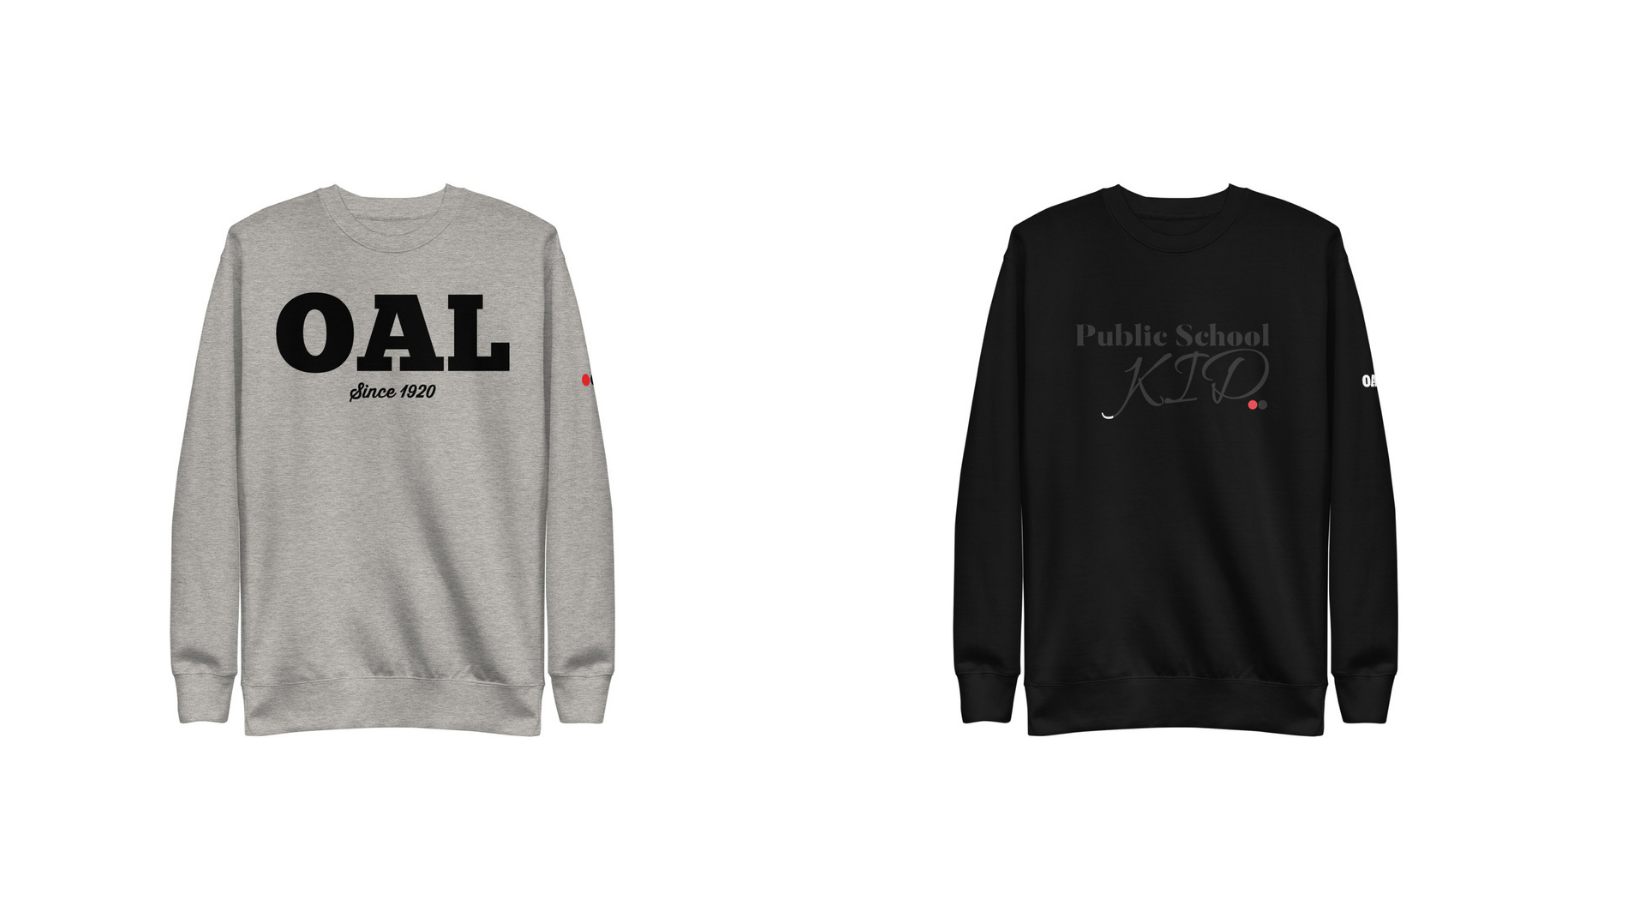 a grey sweatshirt with the letters "OAL" in simple text and a black one on the right